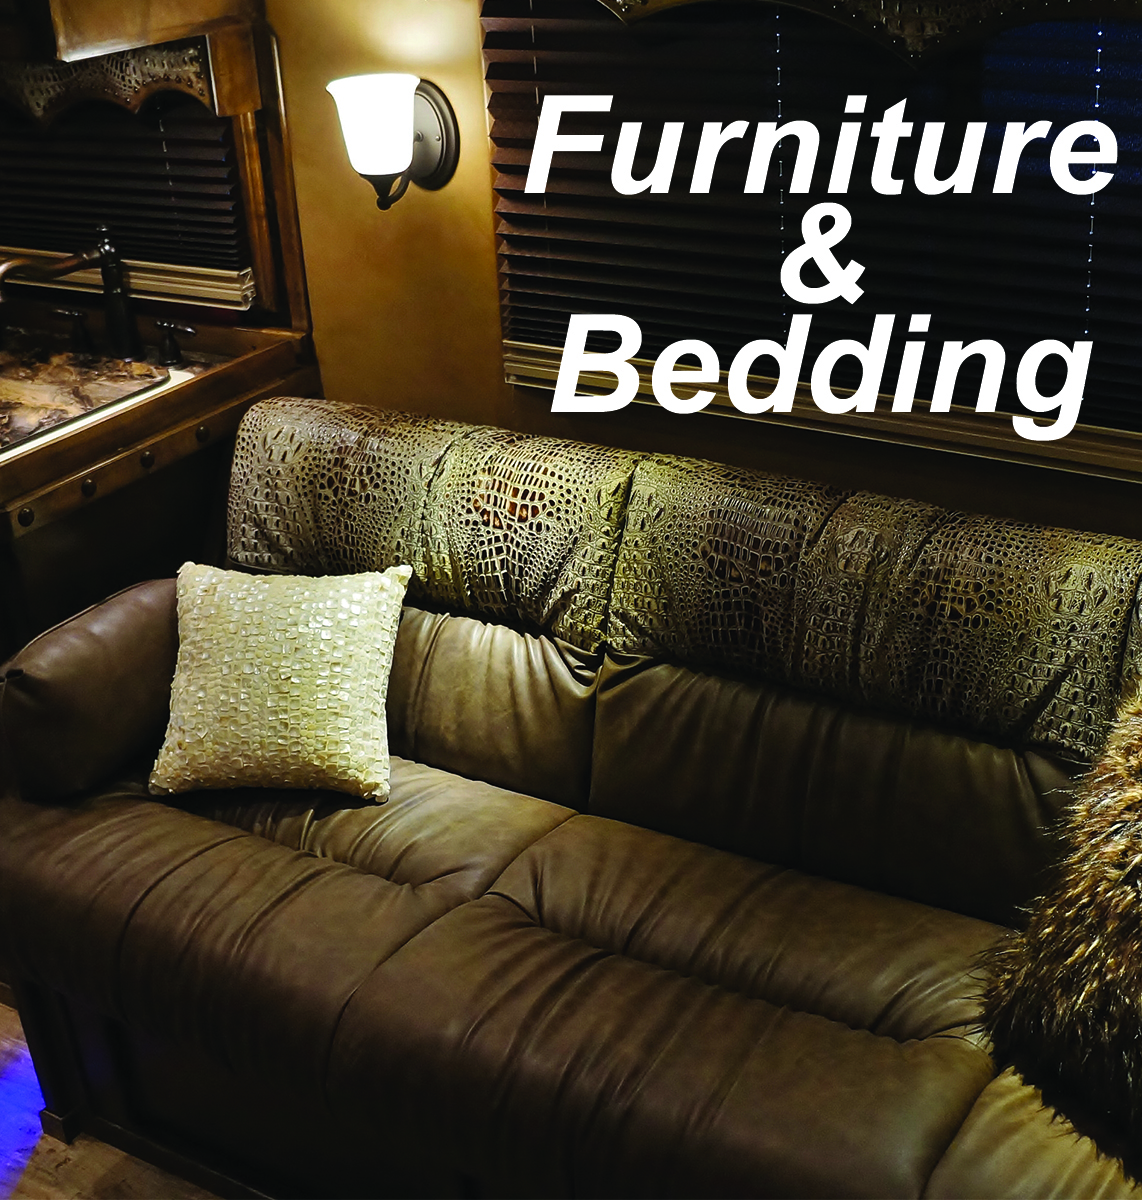 Furniture and Bedding.jpg